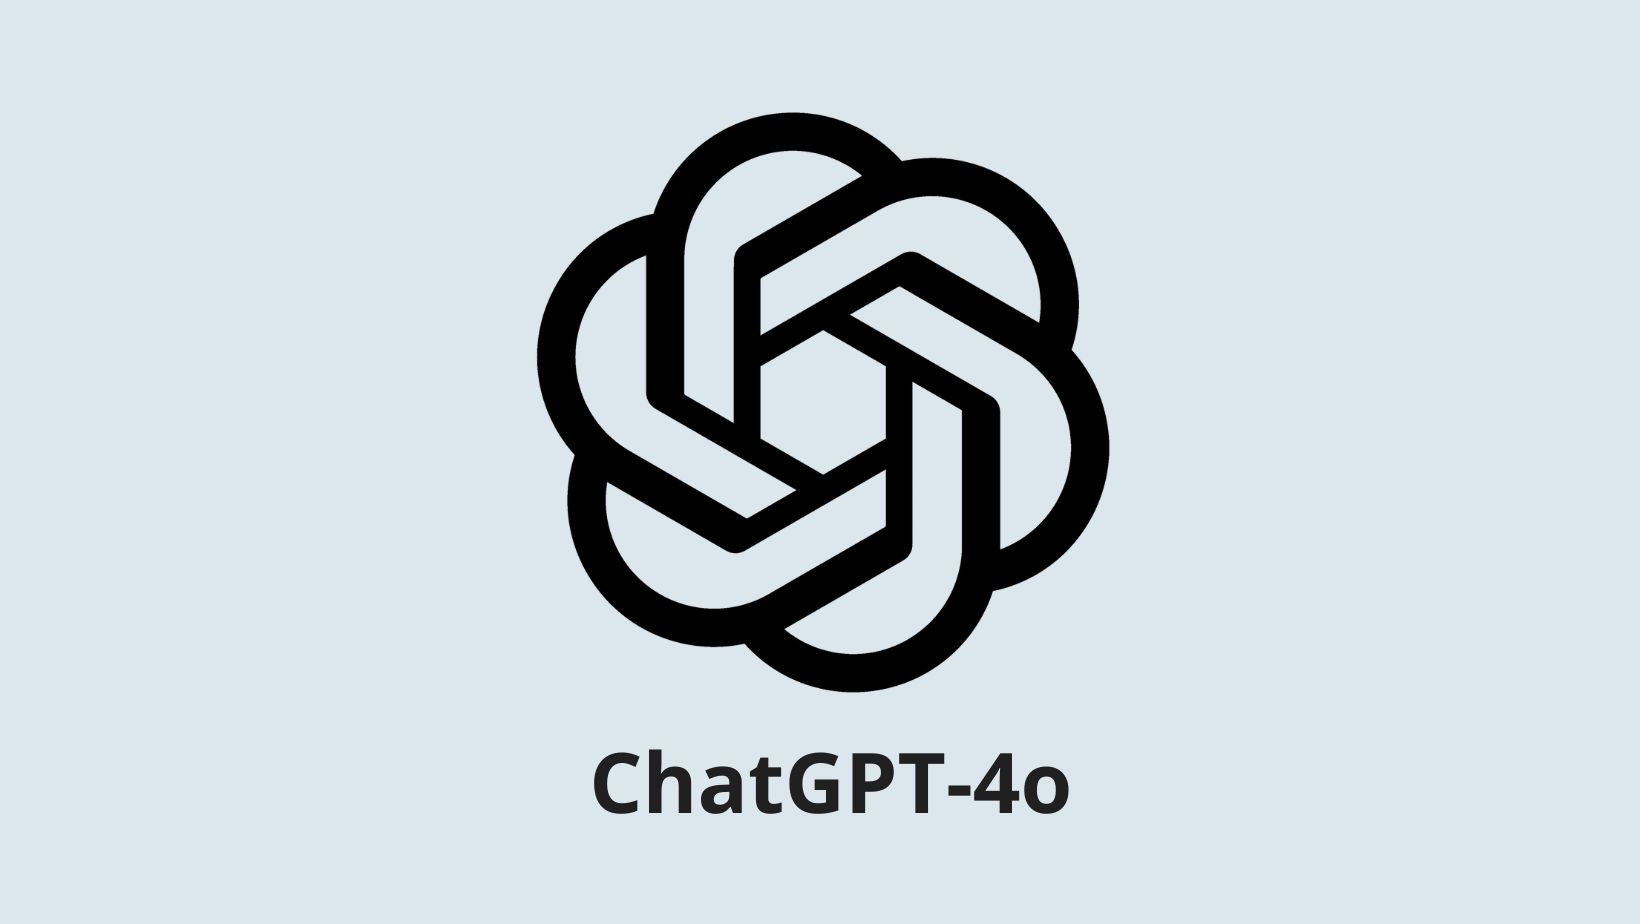 Download ChatGPT APK with Voice Mode, Camera Mode, Image Input for Free with GPT-4o Integration